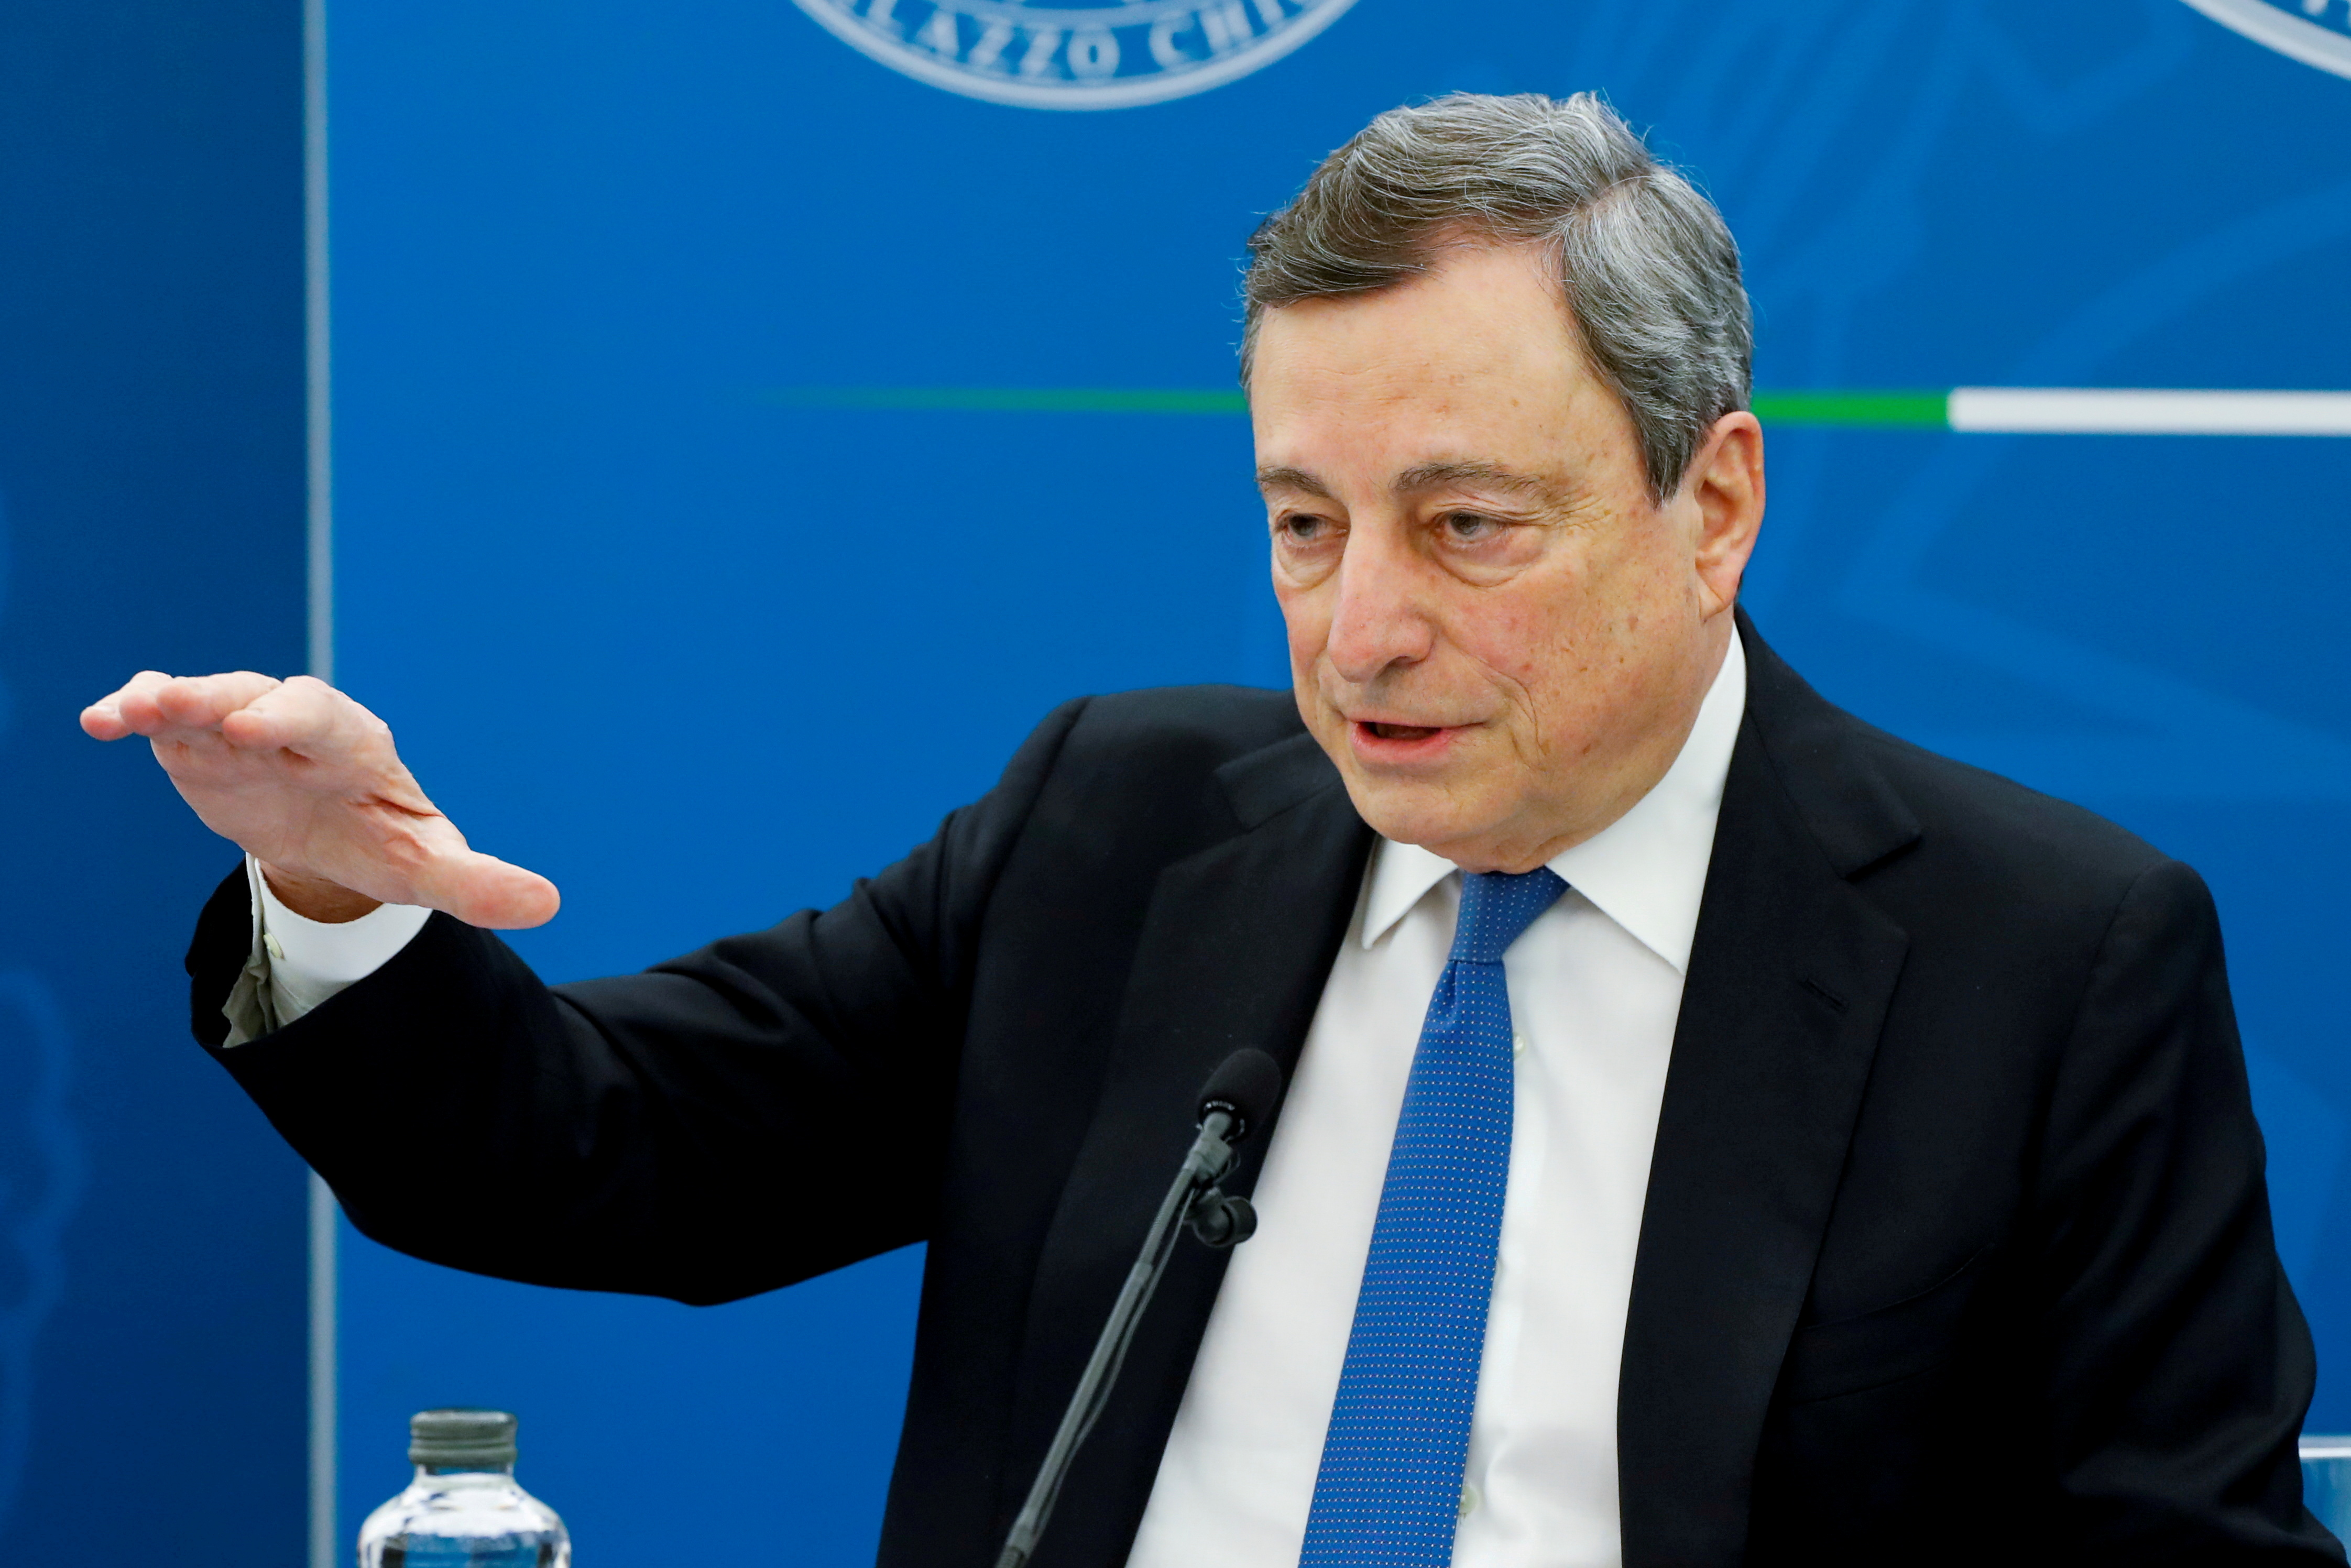 Italy's Prime Minister Mario Draghi gestures as he speaks at a news conference where he is expected to map out the country's next moves in loosening coronavirus disease (COVID-19) restrictions, in Rome, Italy, April 16